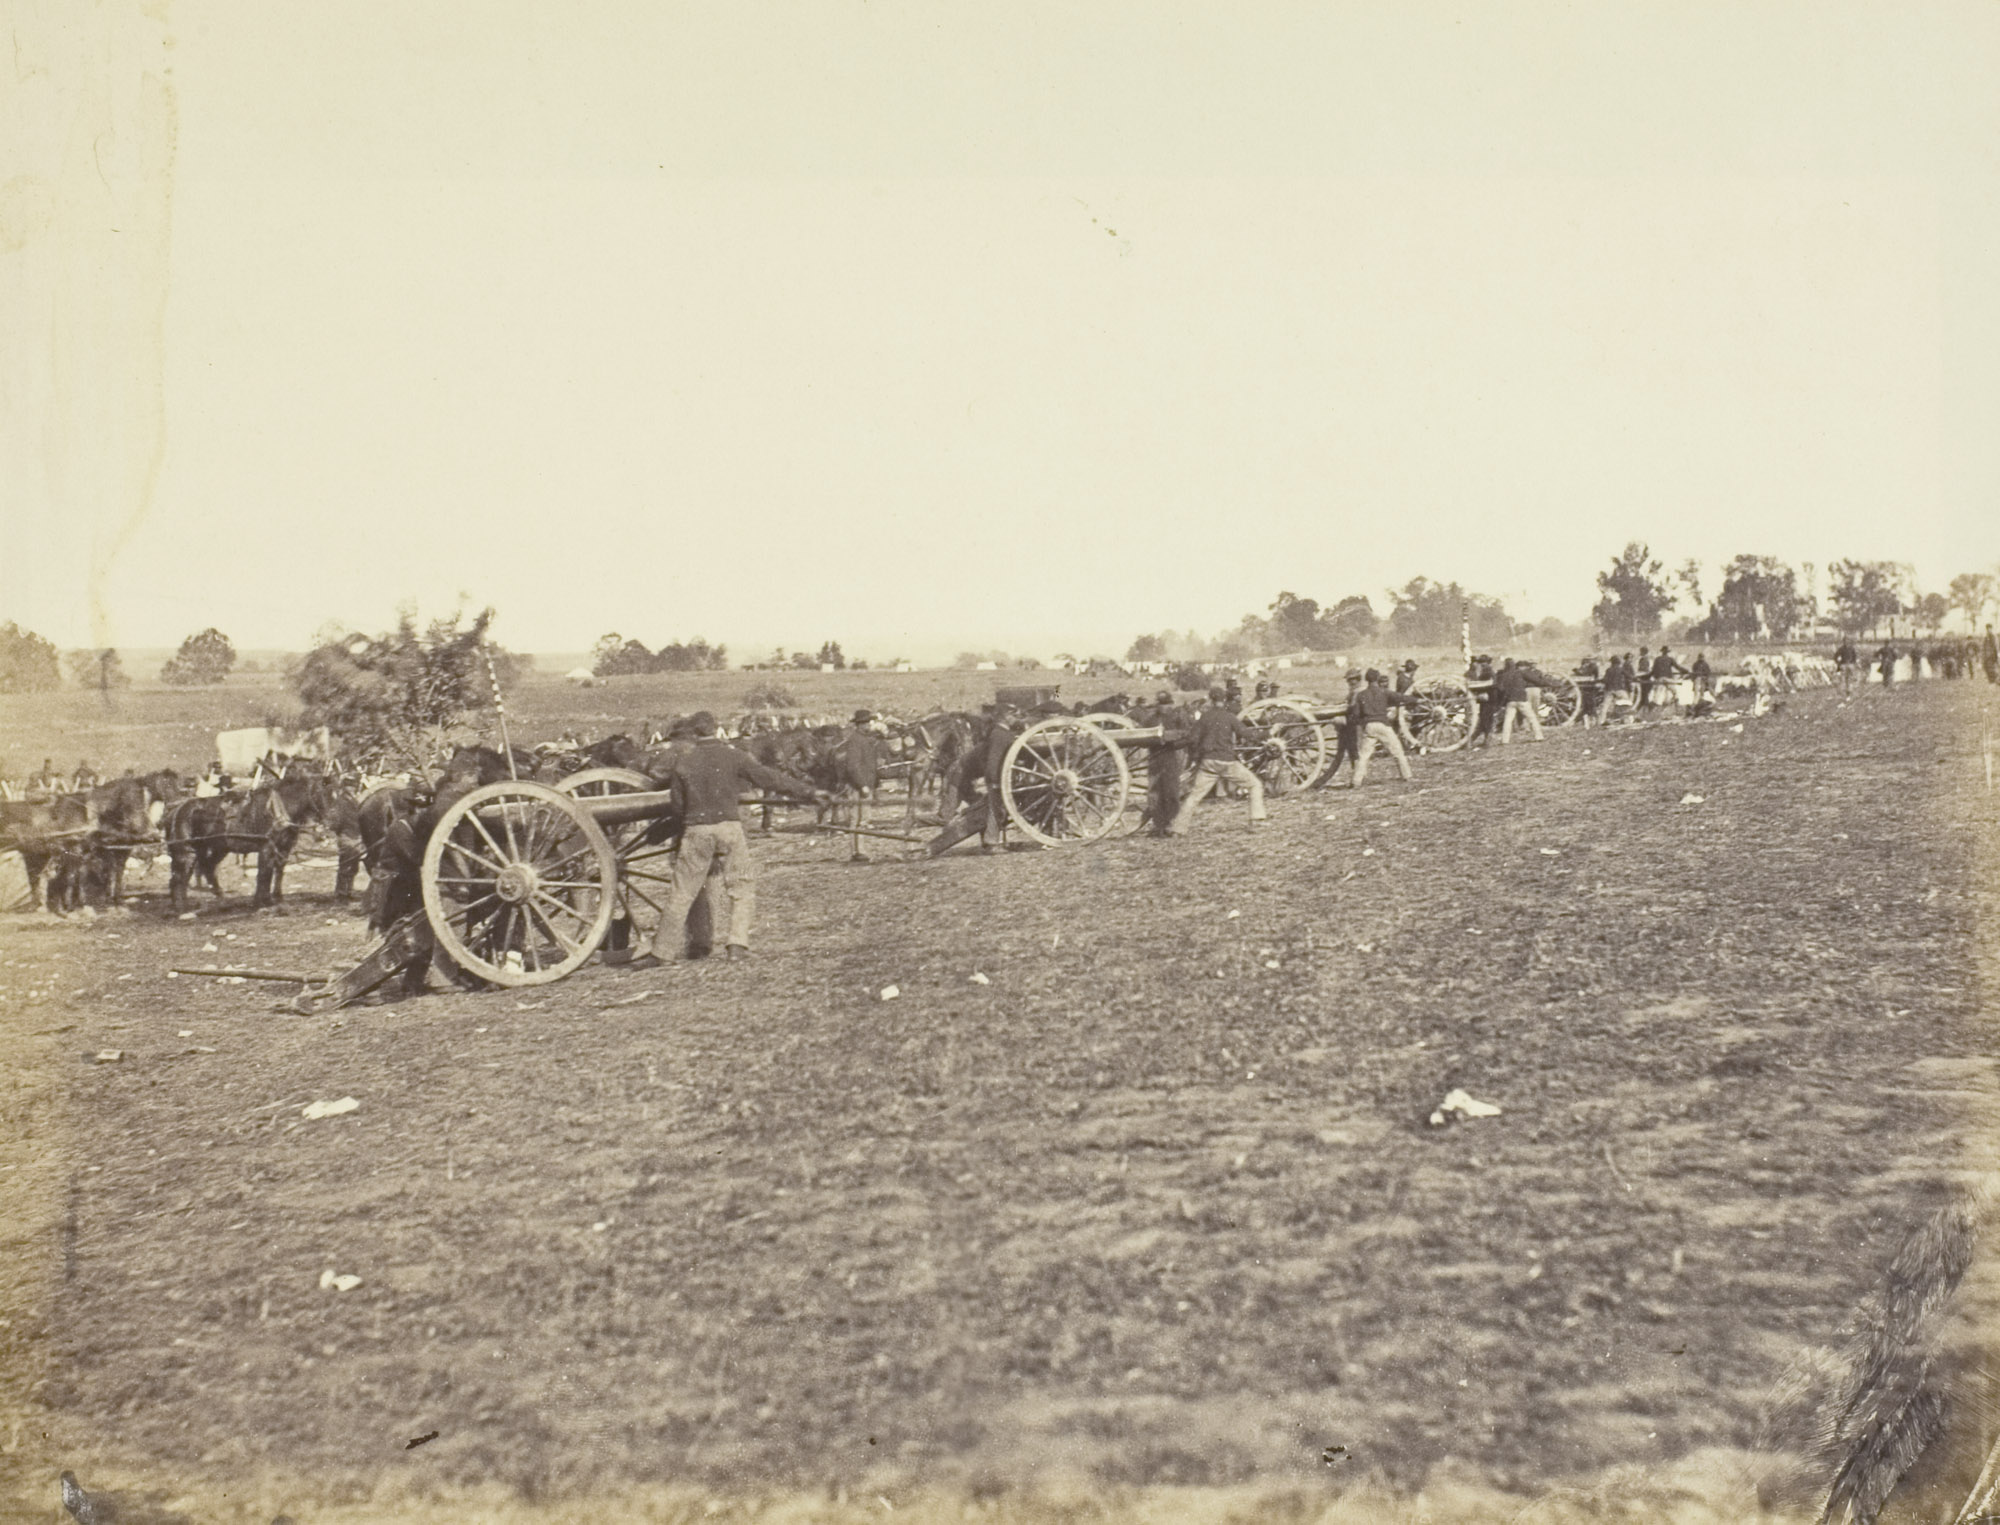 Timothy O'Sullivan, Incidents of the War: Battery D, 5th U.S. Artillery in Action, 1863, albumen print from collodion wet plate negative, 6 15/16 x 9 1/16 inches (The Art Institute of Chicago)